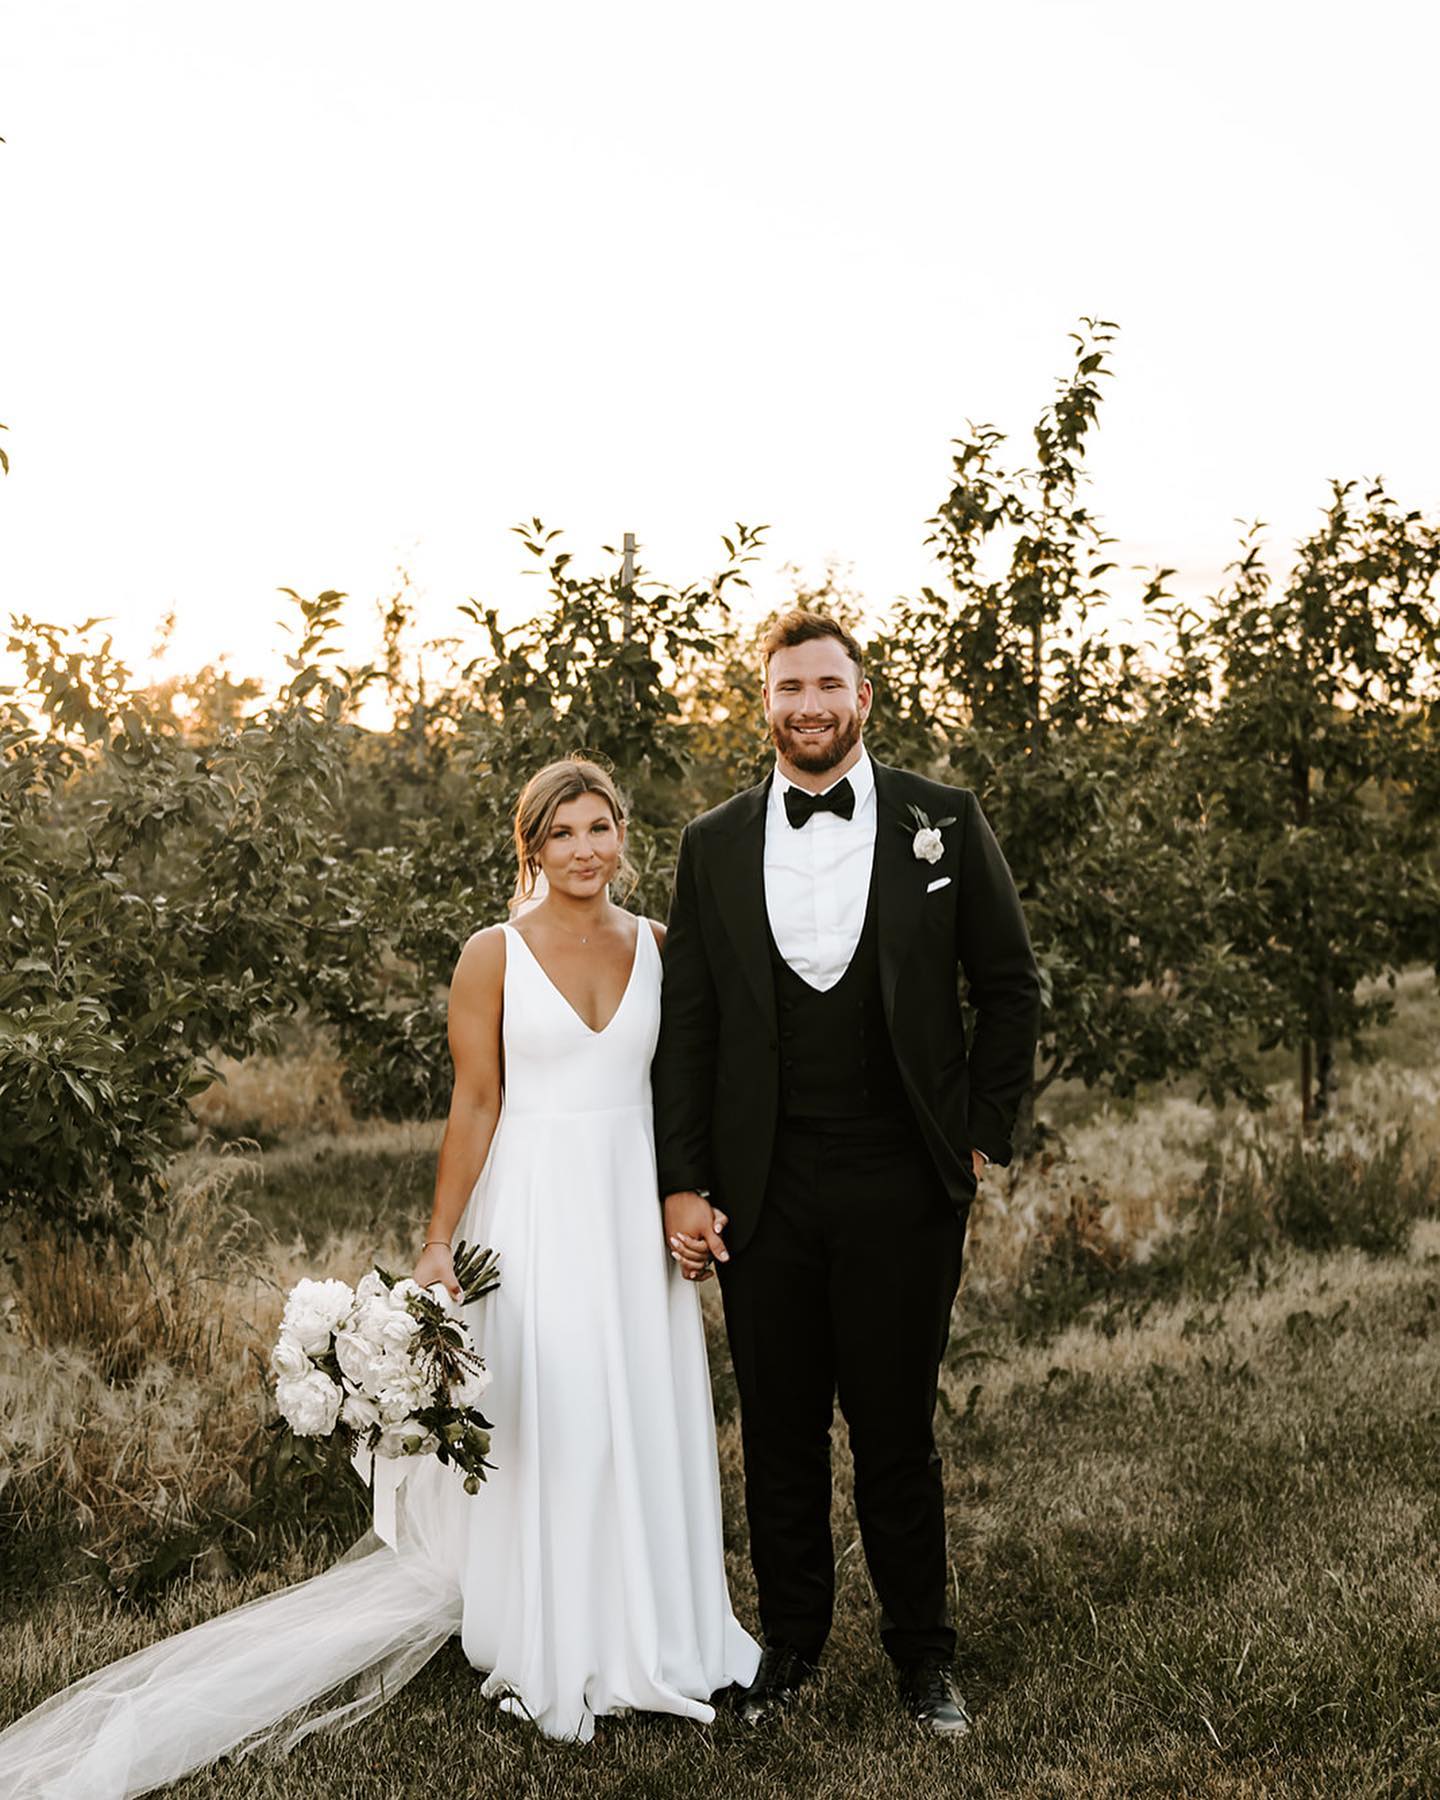 Frank Ragnow And Lucy Ragnow During Their Wedding